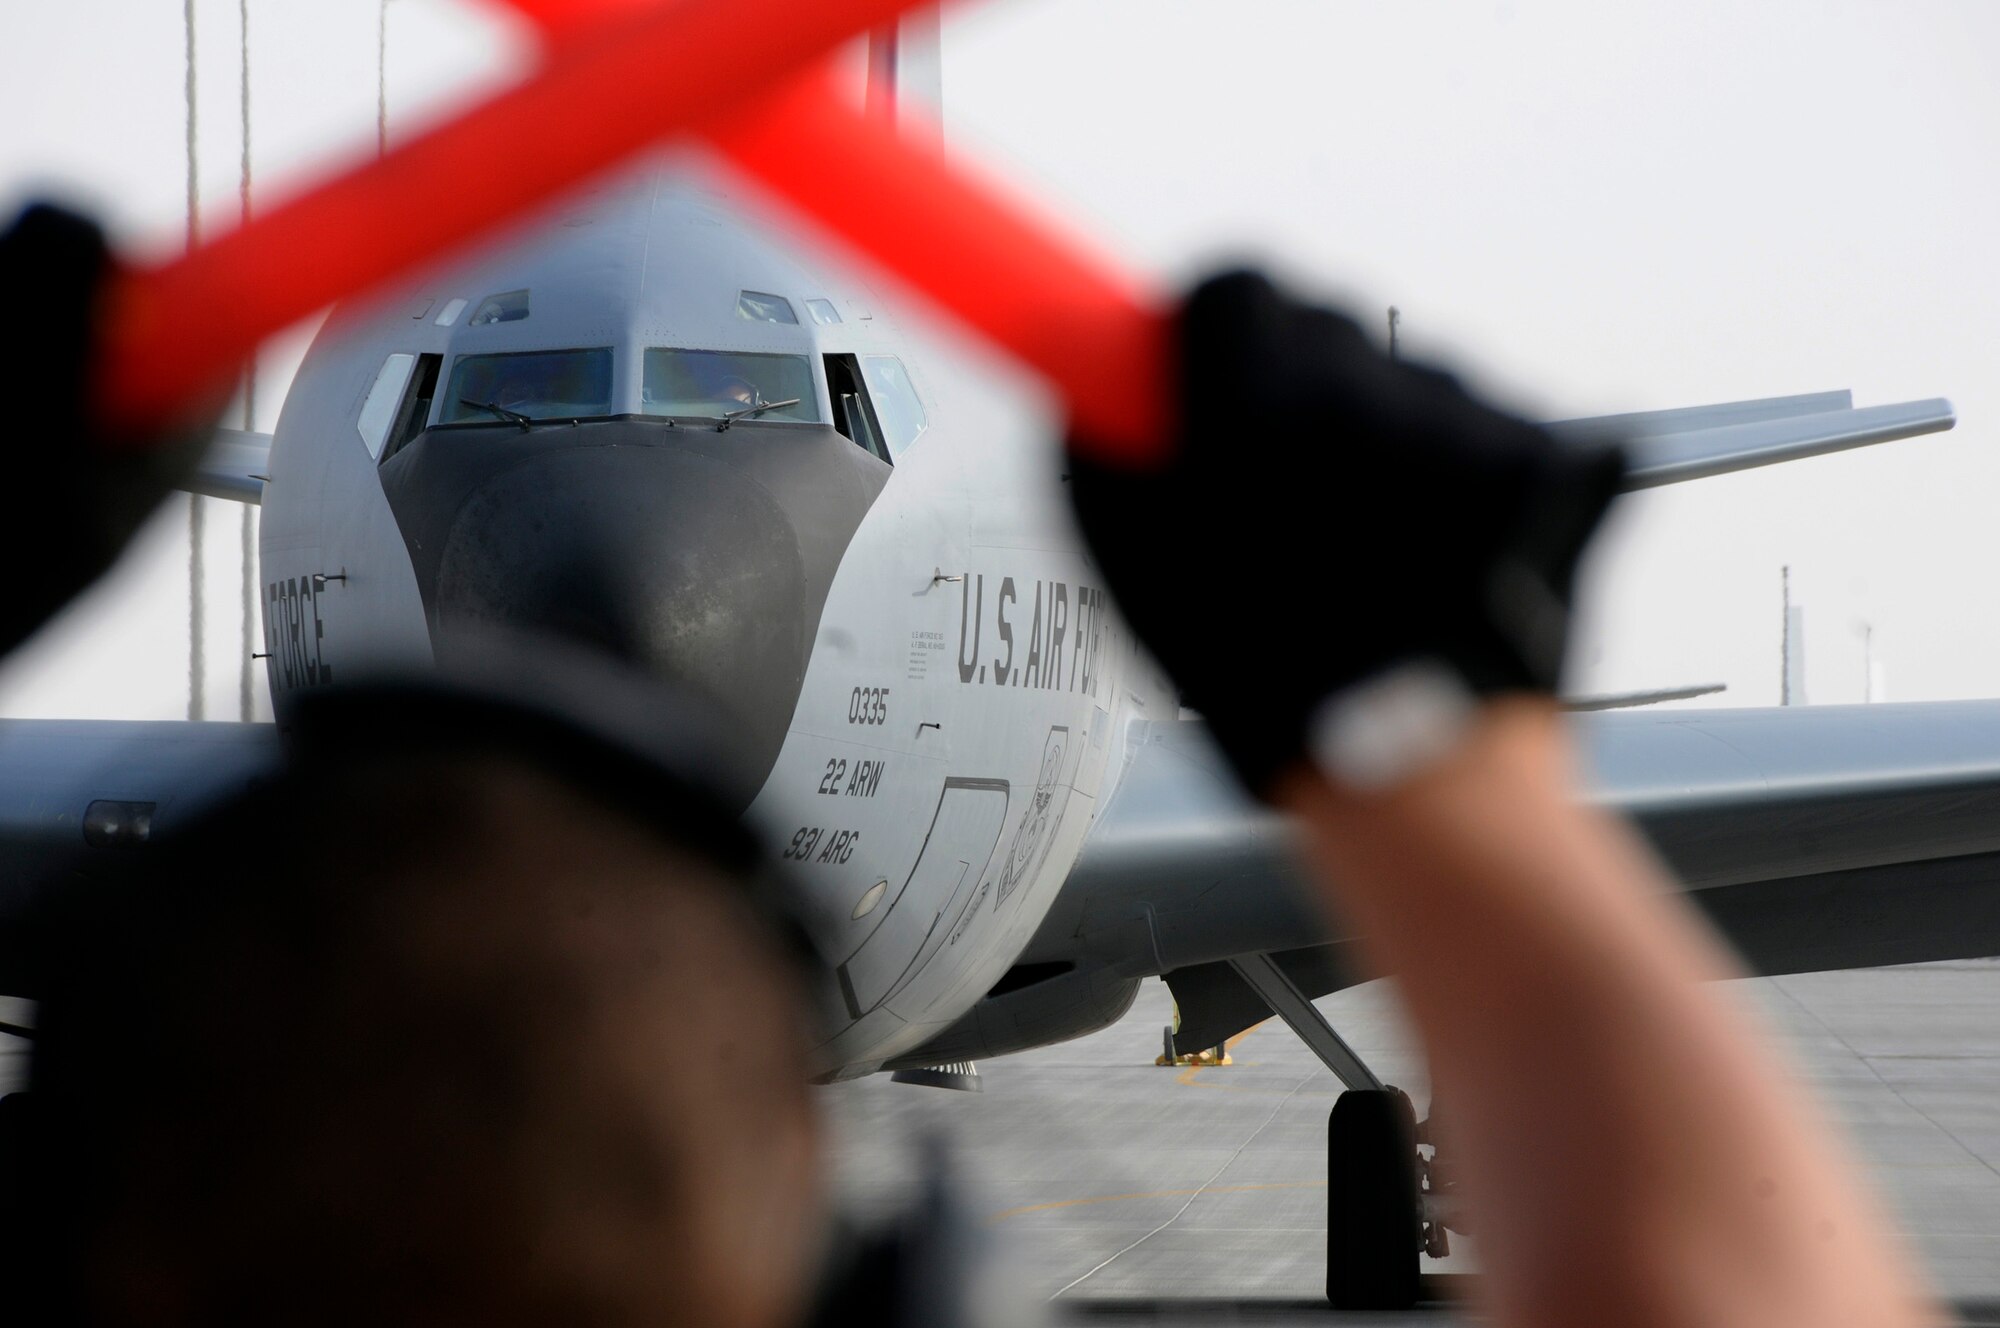 Senior Airman Michael Reyes, 379th Expeditionary Aircraft Maintenance Squadron, 340th Aircraft Maintenance Unit, signals a KC-135 Stratotanker from the 22nd Air Refueling Wing, McConnell Air Force Base, Kan., to hold prior to leaving its parking spot and taxiing off the ramp here at this undisclosed air base in Southwest Asia.  The KC-135 provides aerial refueling support to Air Force, Navy, Marine Corps and allied nation aircraft engaged in Operations Iraqi and Enduring Freedom and Joint Task Force-Horn of Africa.  Airman Reyes, a native of Temecula, Calif., is deployed from McConnell AFB, Kan. (U.S. Air Force photo by Tech. Sgt. Michael Boquette/Released)